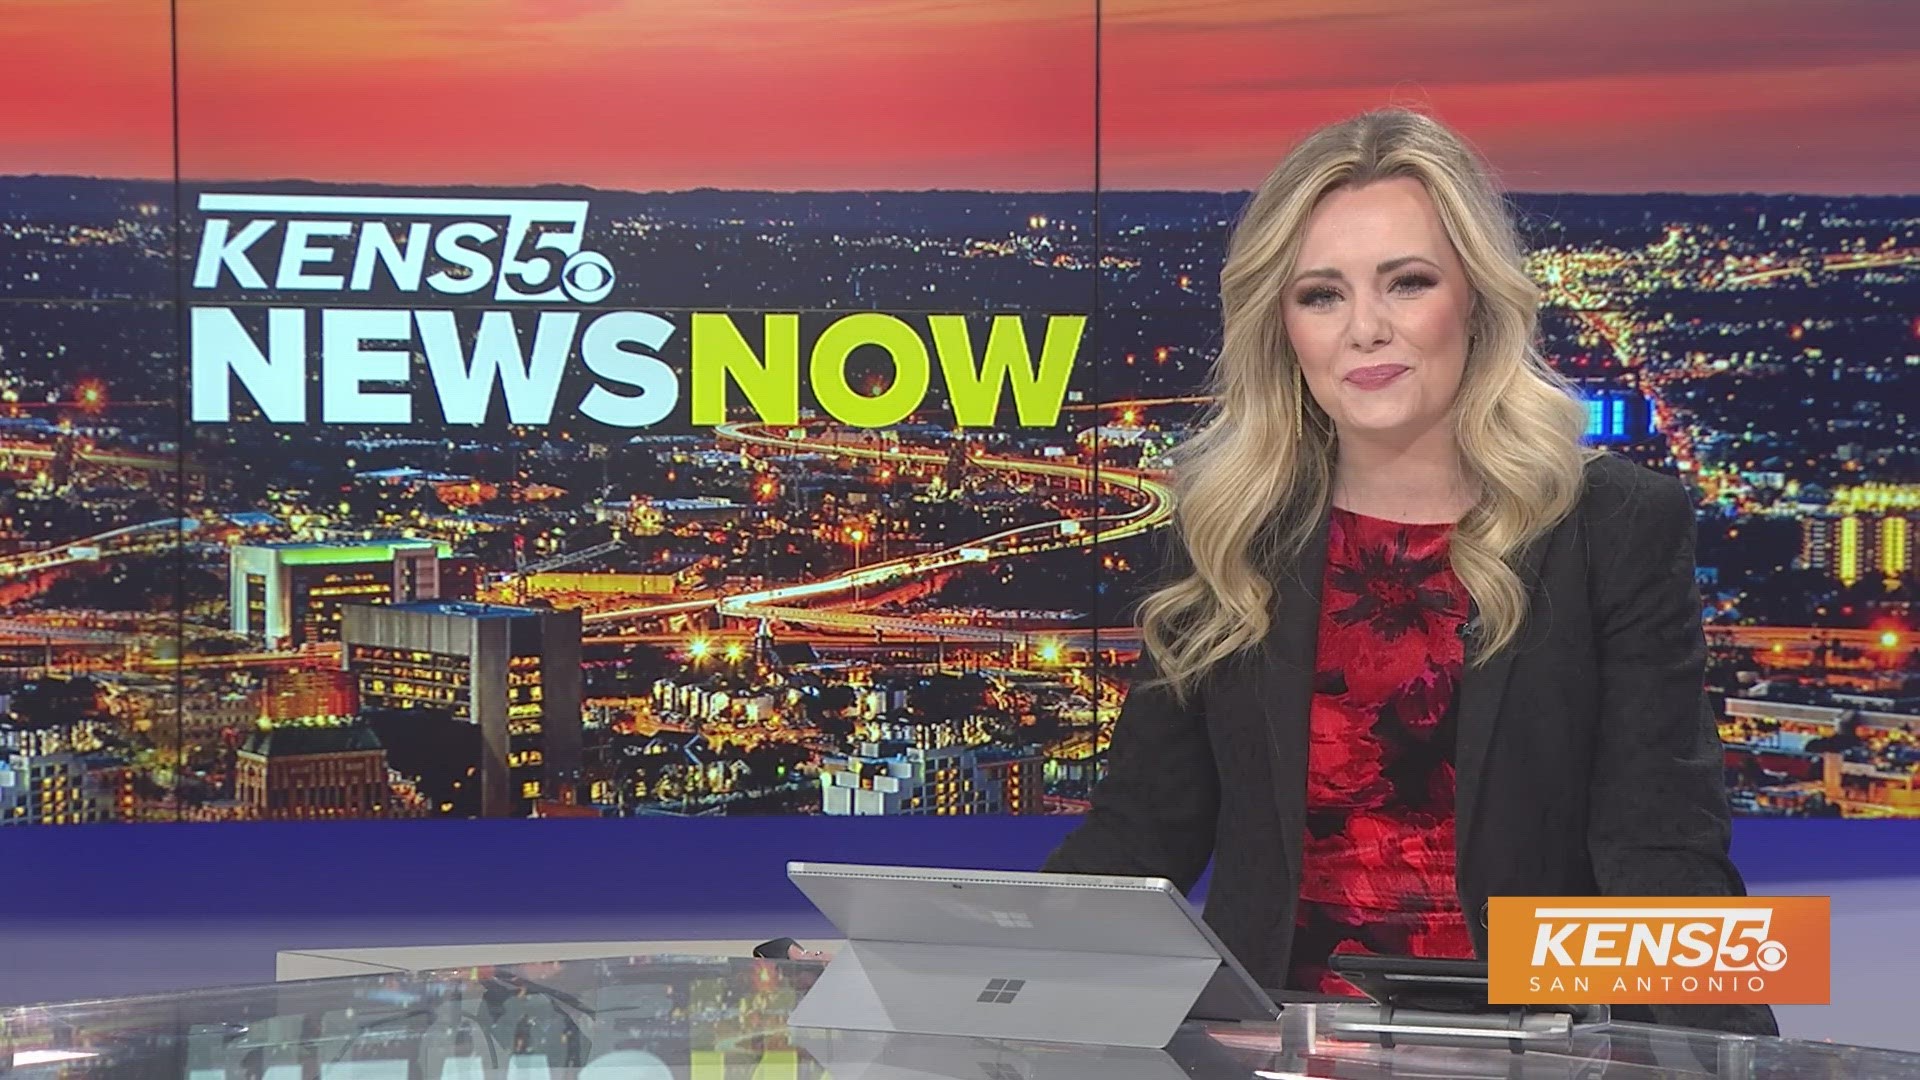 Follow us here to get the latest top headlines with the KENS 5 anchor team every weekday!